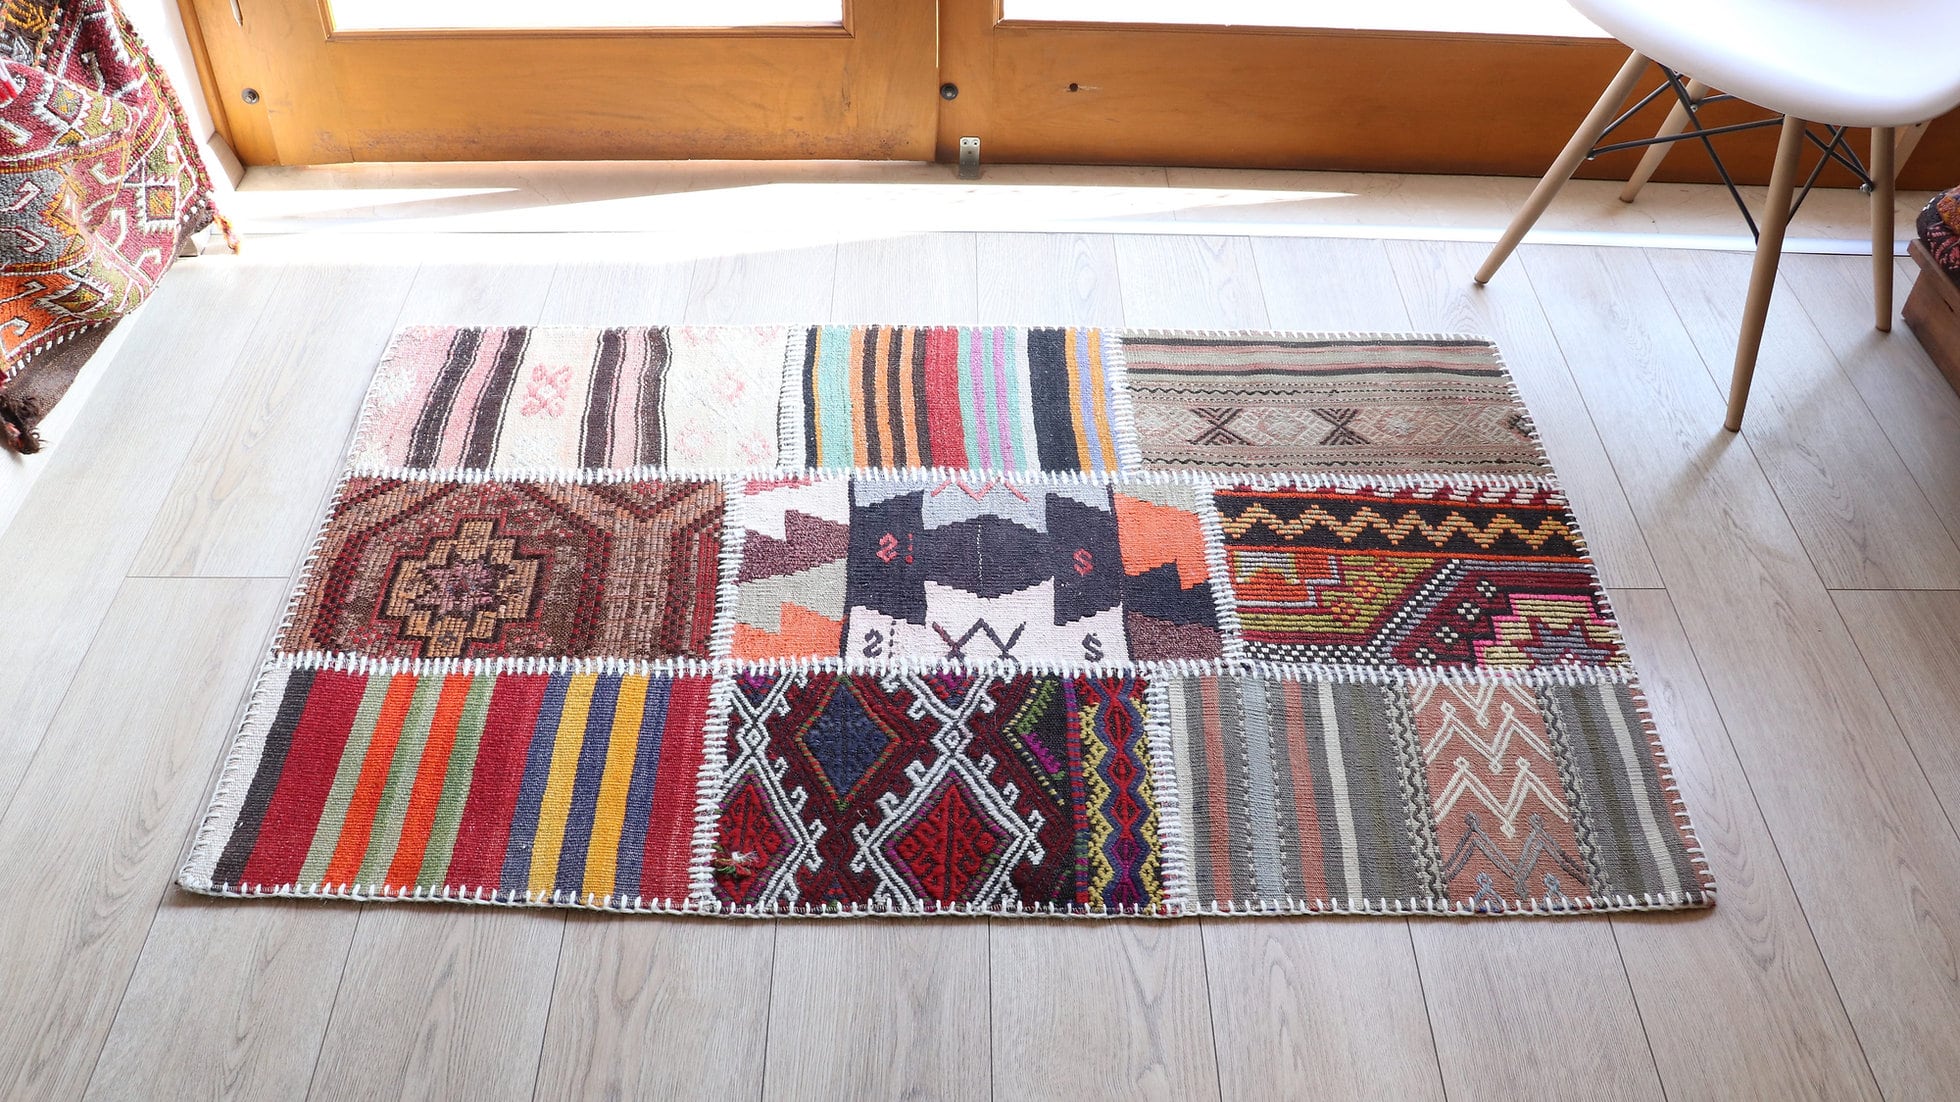 Patchwork antique carpet in vibrant colors and patterns